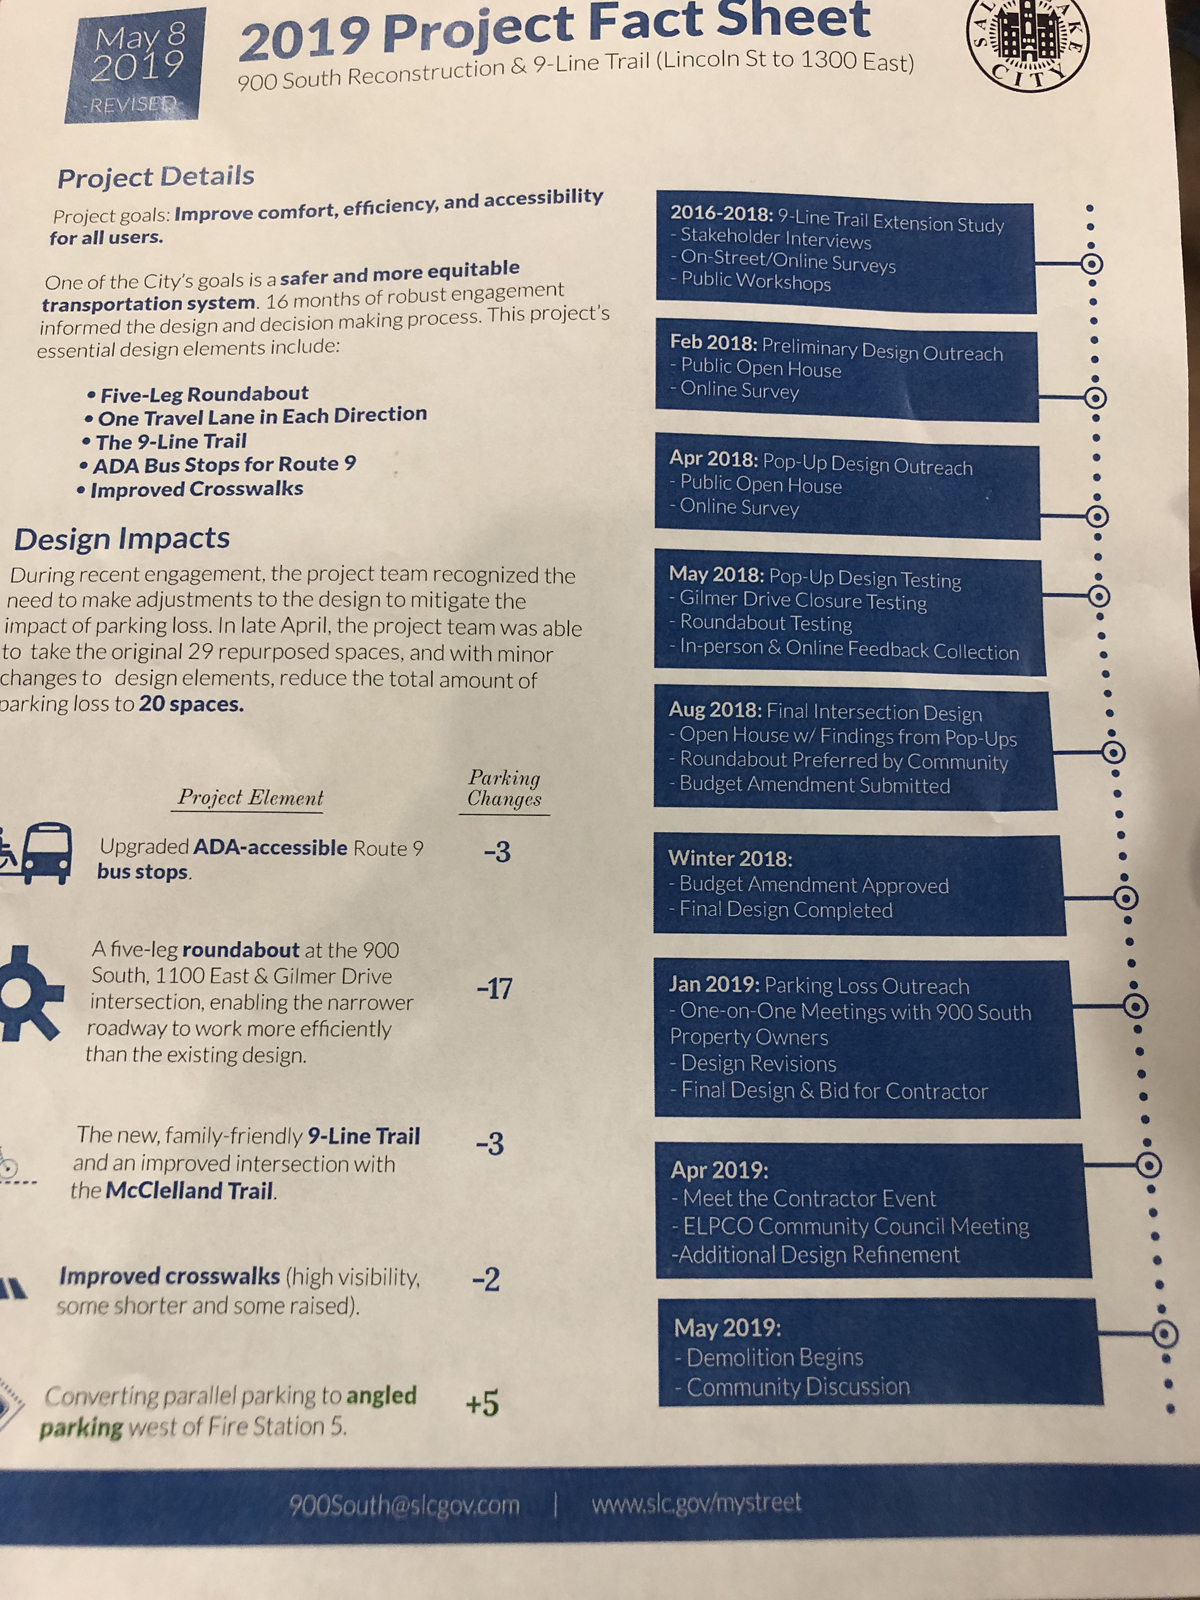 The project fact sheet for 900 S in Salt Lake City from May 8, 2019.